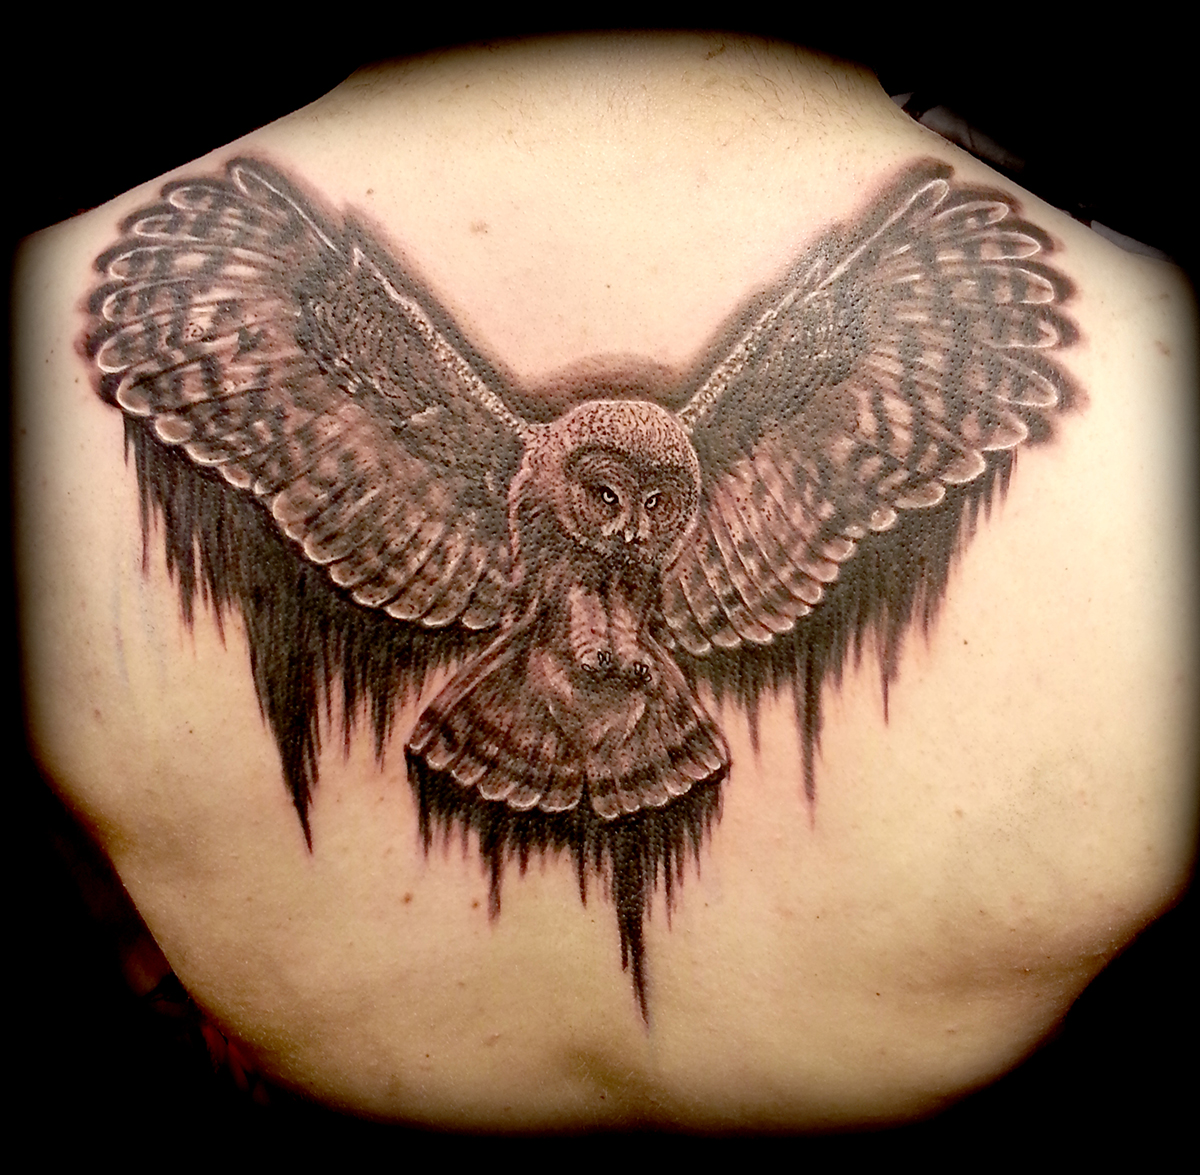 Owl Tattoo on Lower Back by Jai Gilchrist